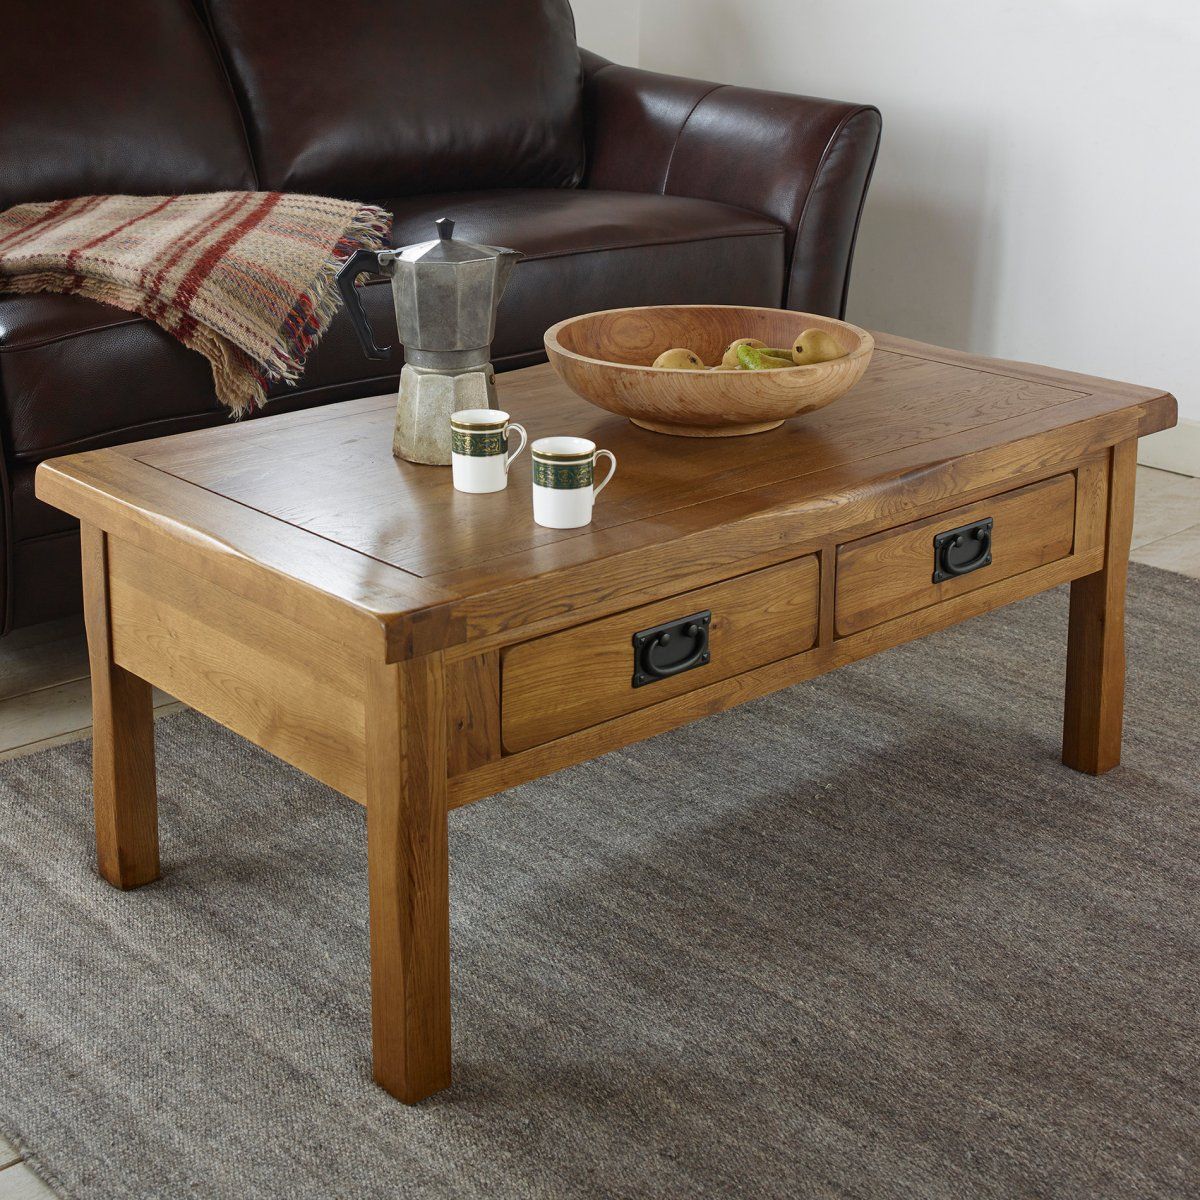 Original Rustic 4 Drawer Coffee Table In Solid Oak With Rustic Wood Coffee Tables (View 11 of 21)